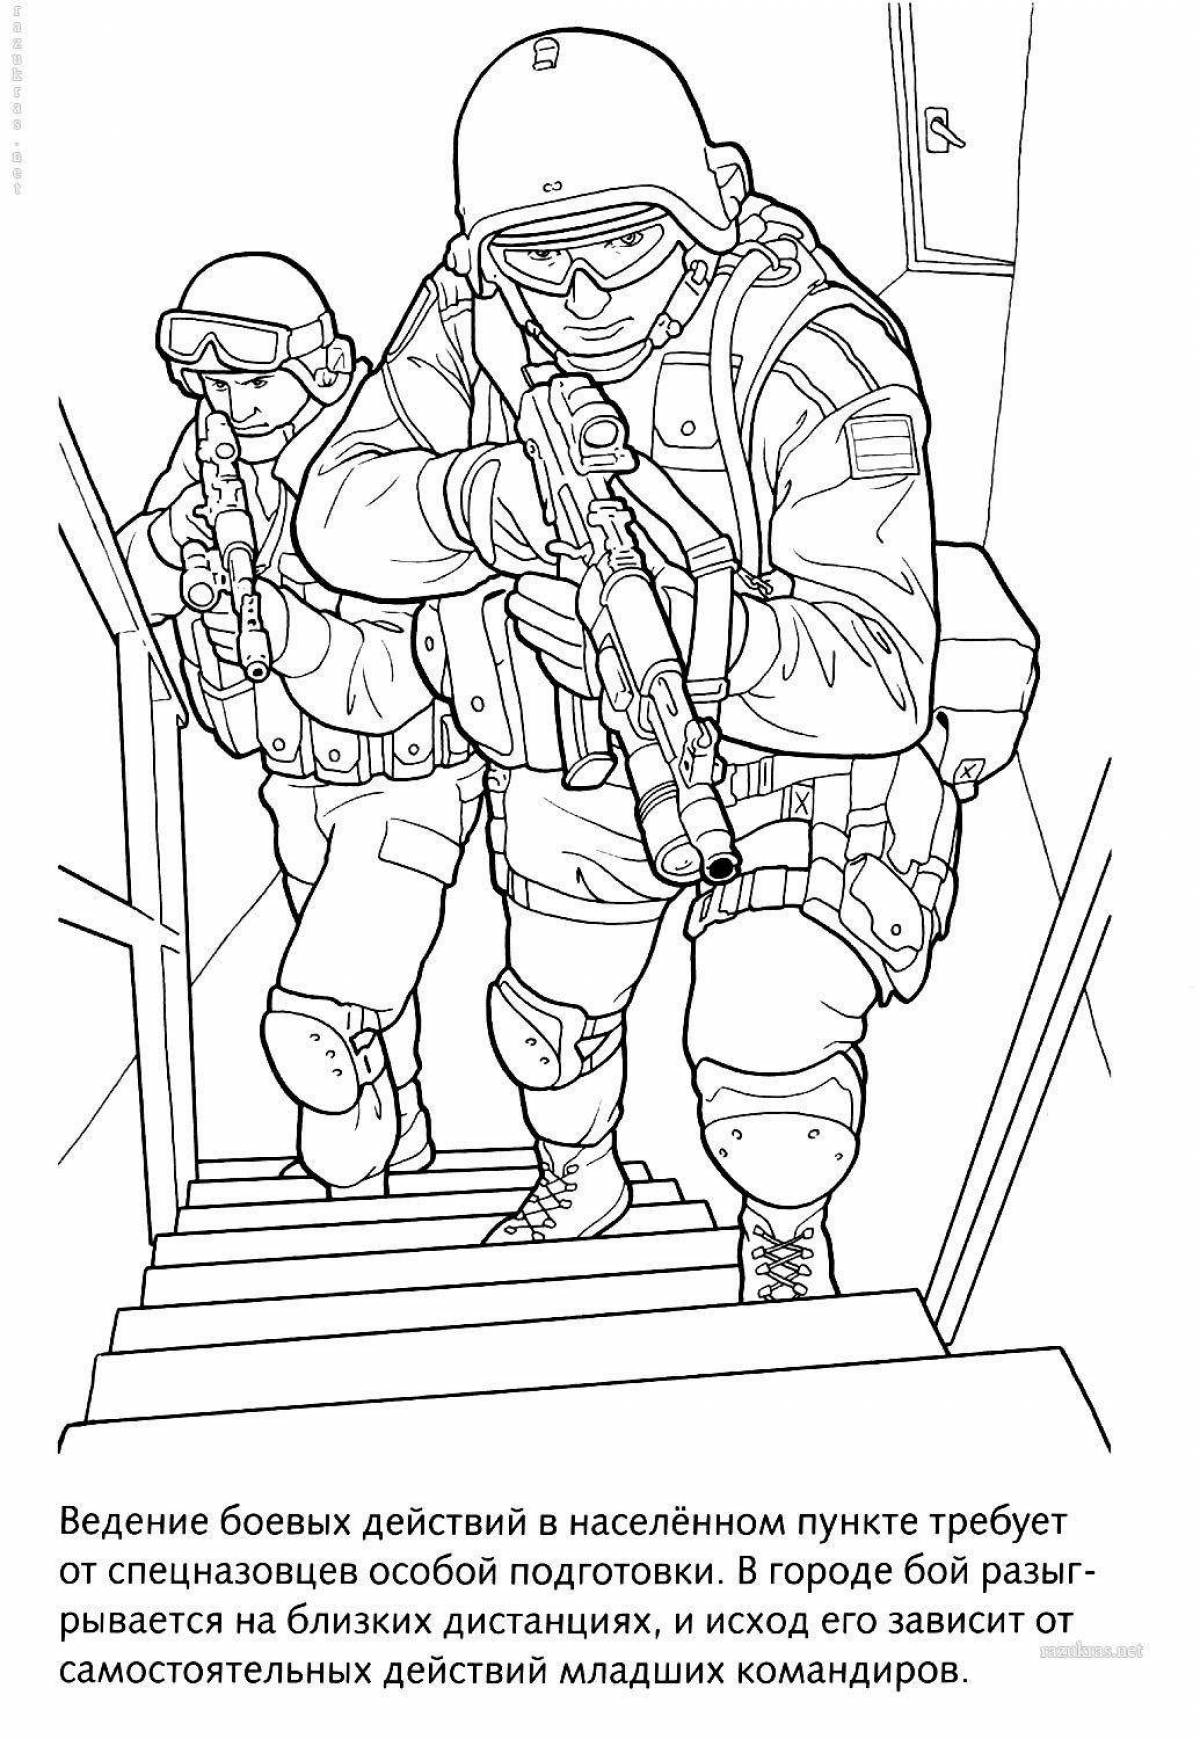 Inspirational swat coloring book for boys